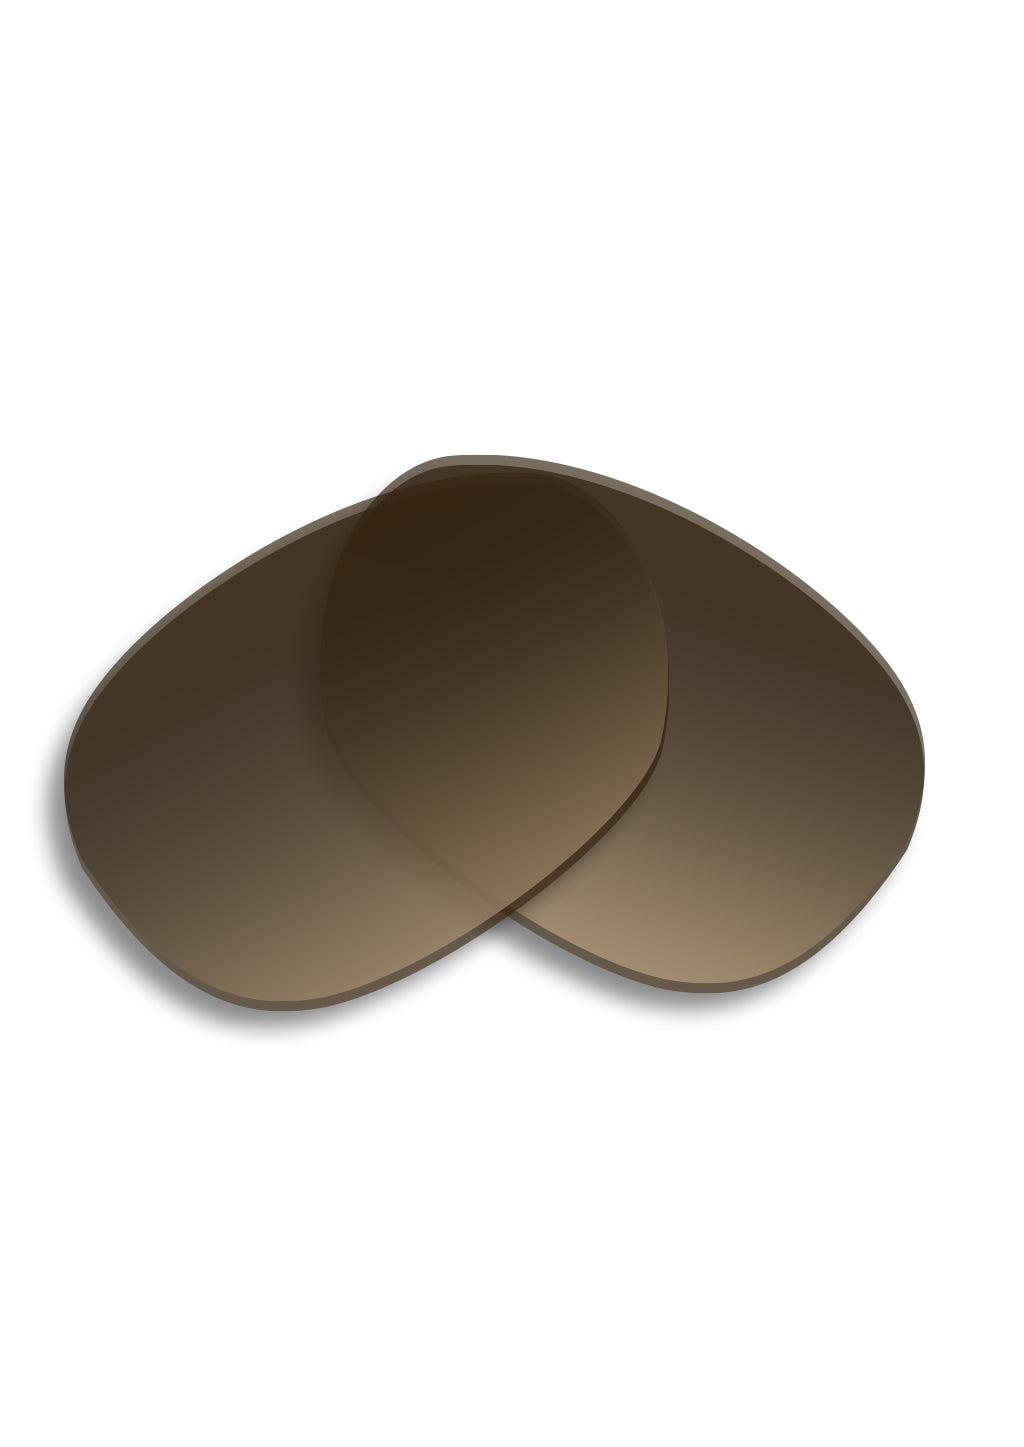 Extra lenses for Titan V2 sunglasses. This is gradient brown.